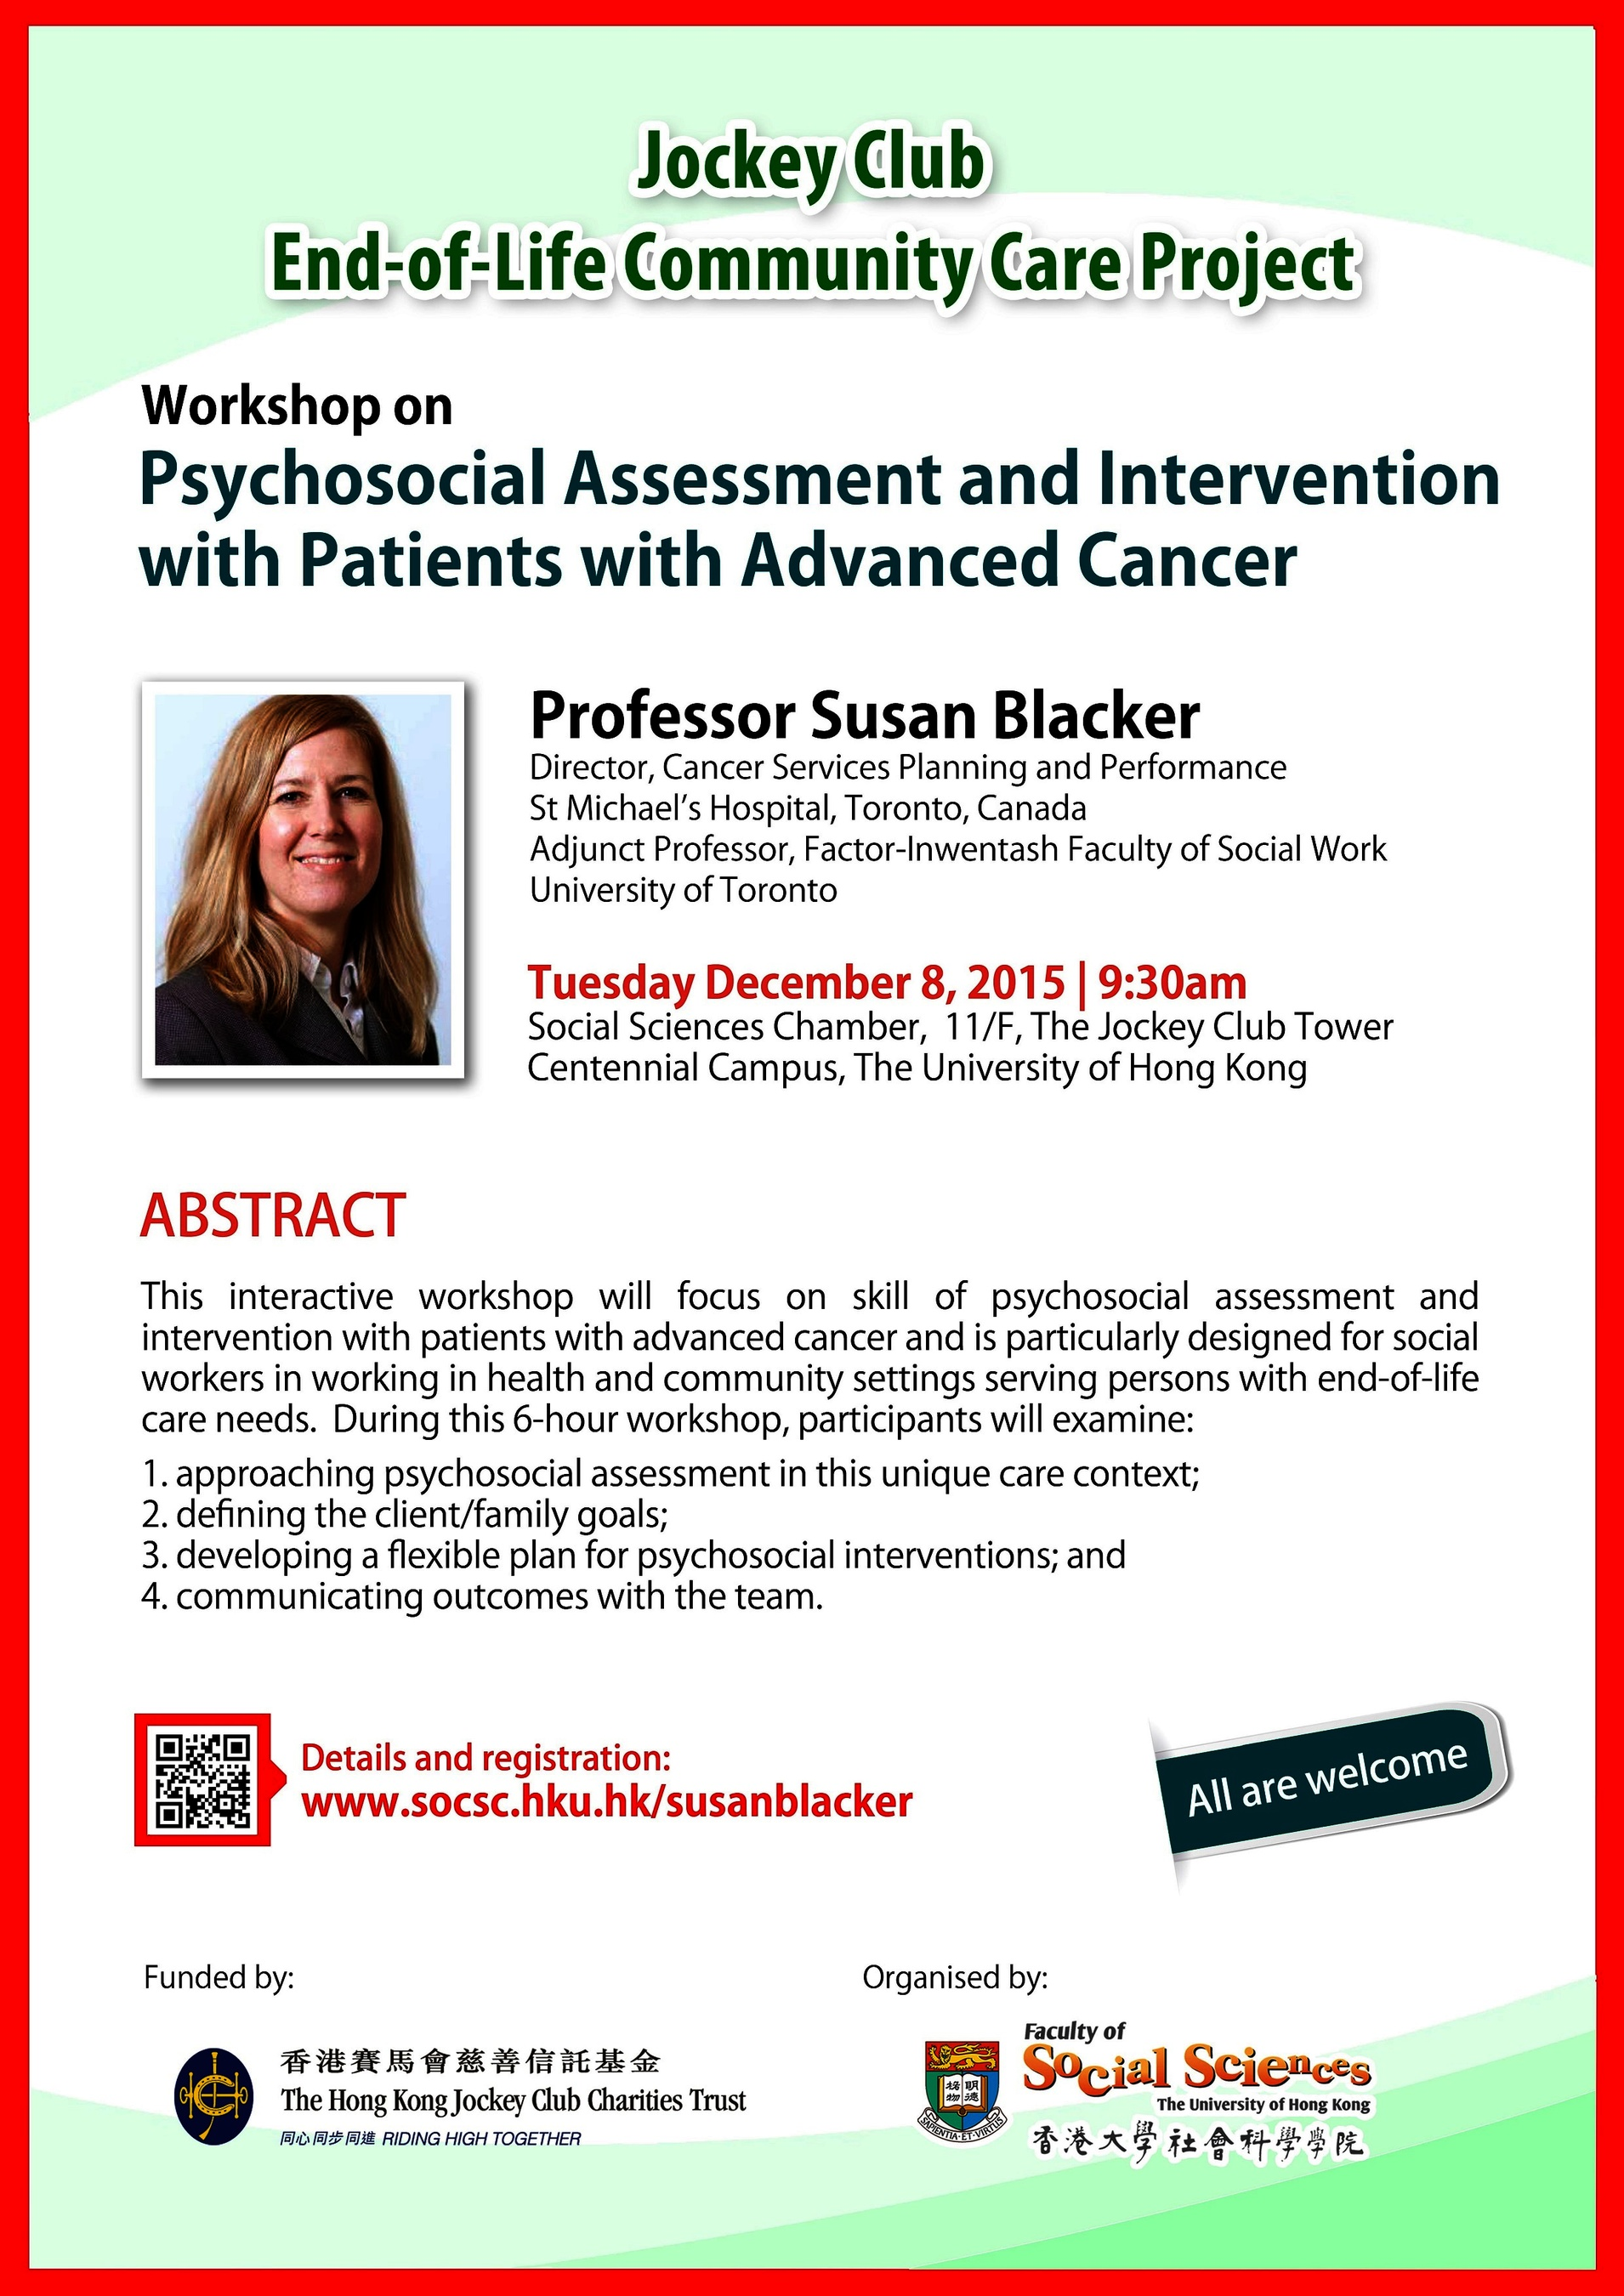 Workshop on Psychosocial Assessment and Intervention with Patients with Advanced Cancer